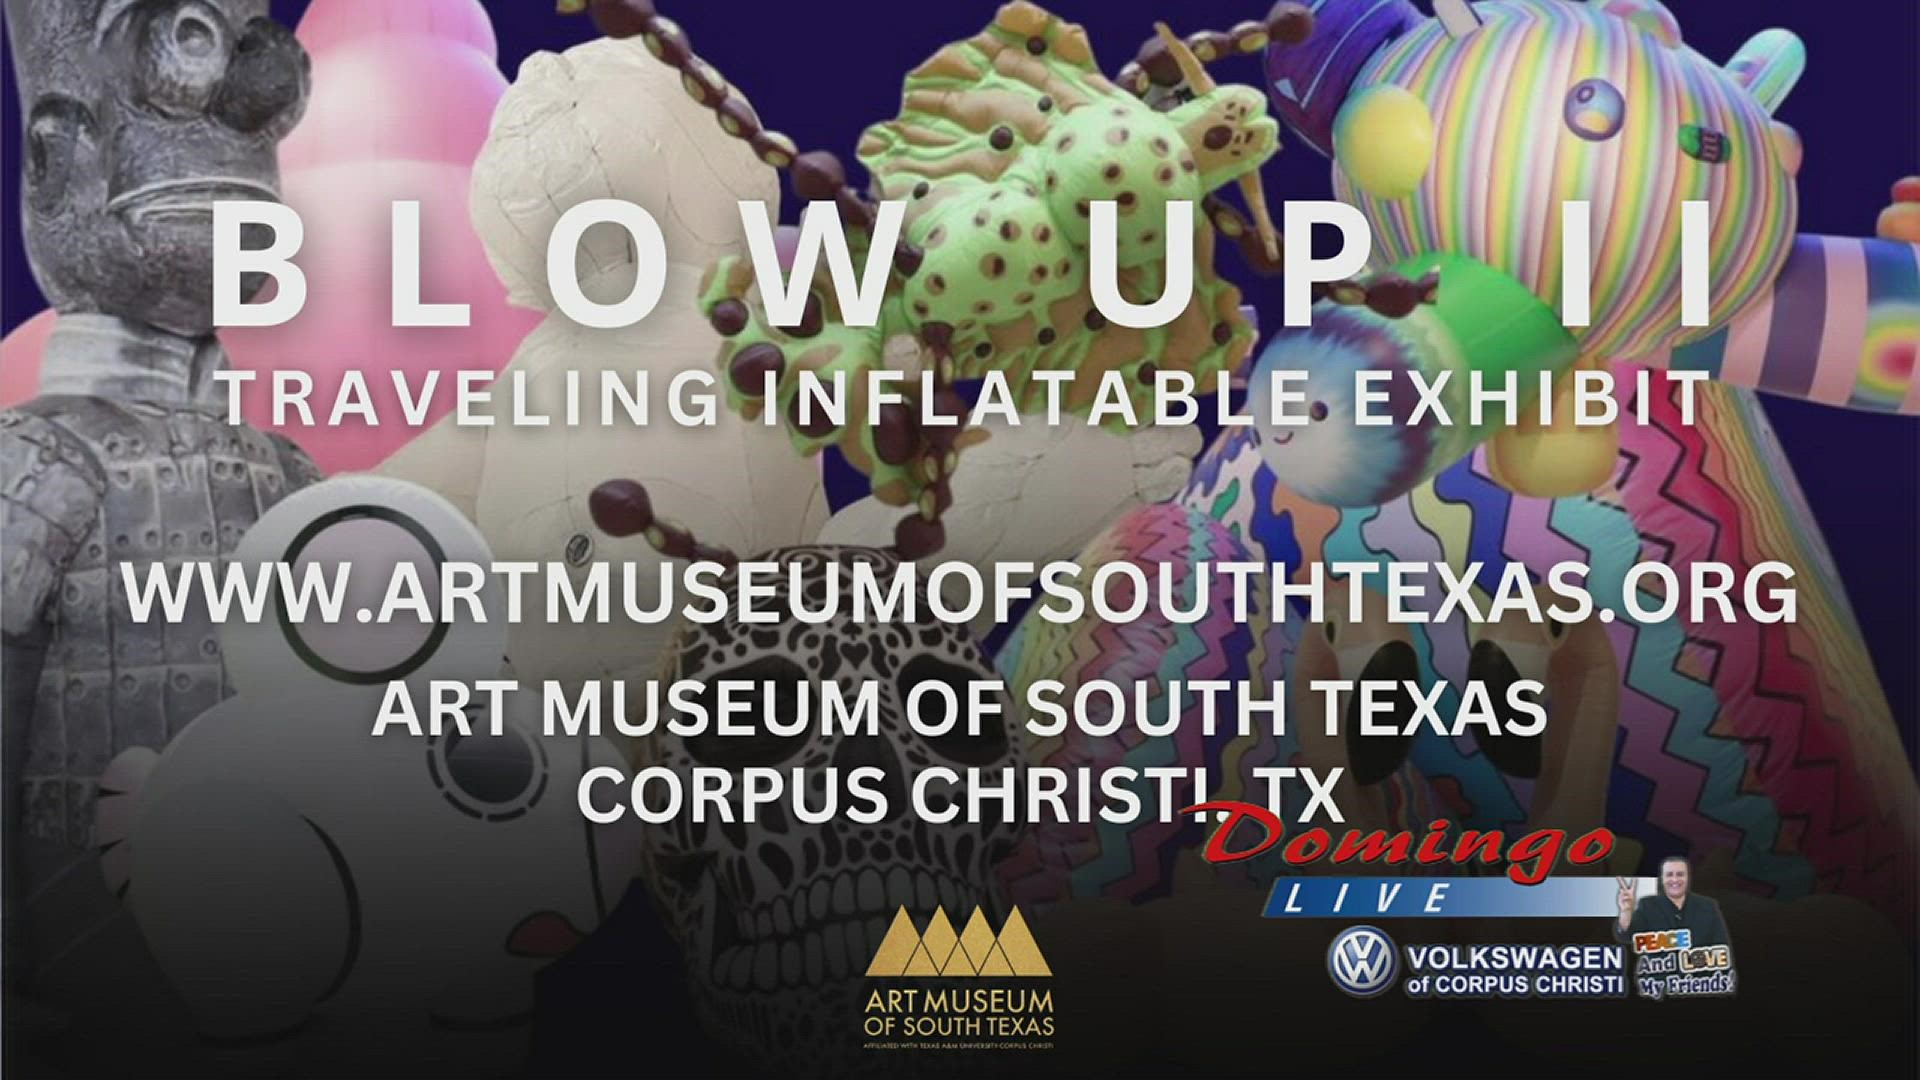 Alexis Deleon with the Art Museum of South Texas joined us live to invite us to see the BLOW UP II BLOW UP II Traveling Inflatable Exhibit.